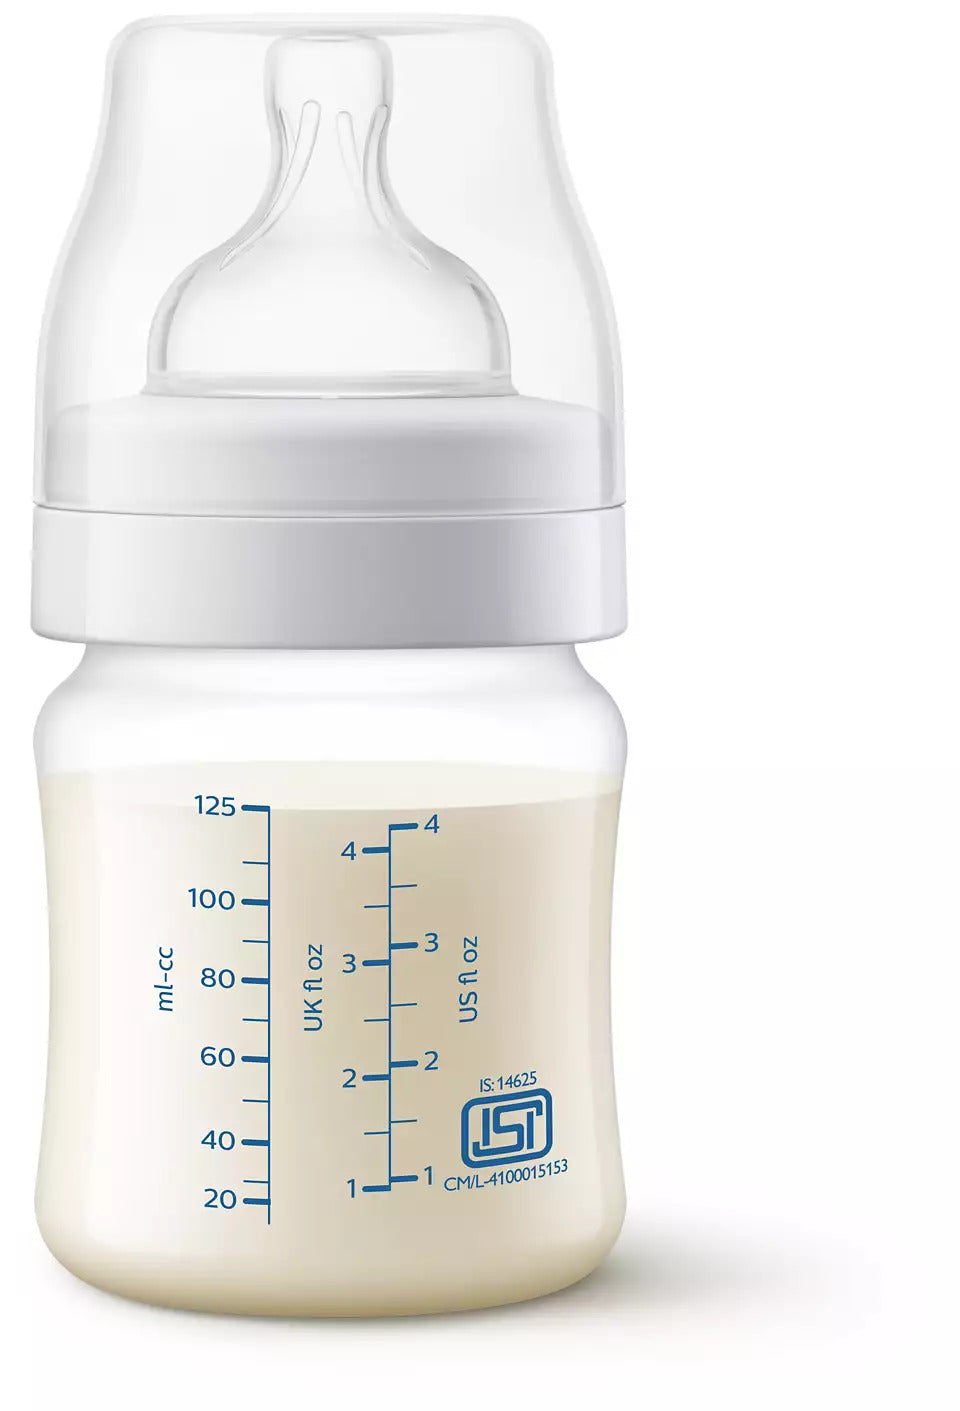 Philips Avent Anti-colic baby bottle (Twin Pack) 125ml 0m+